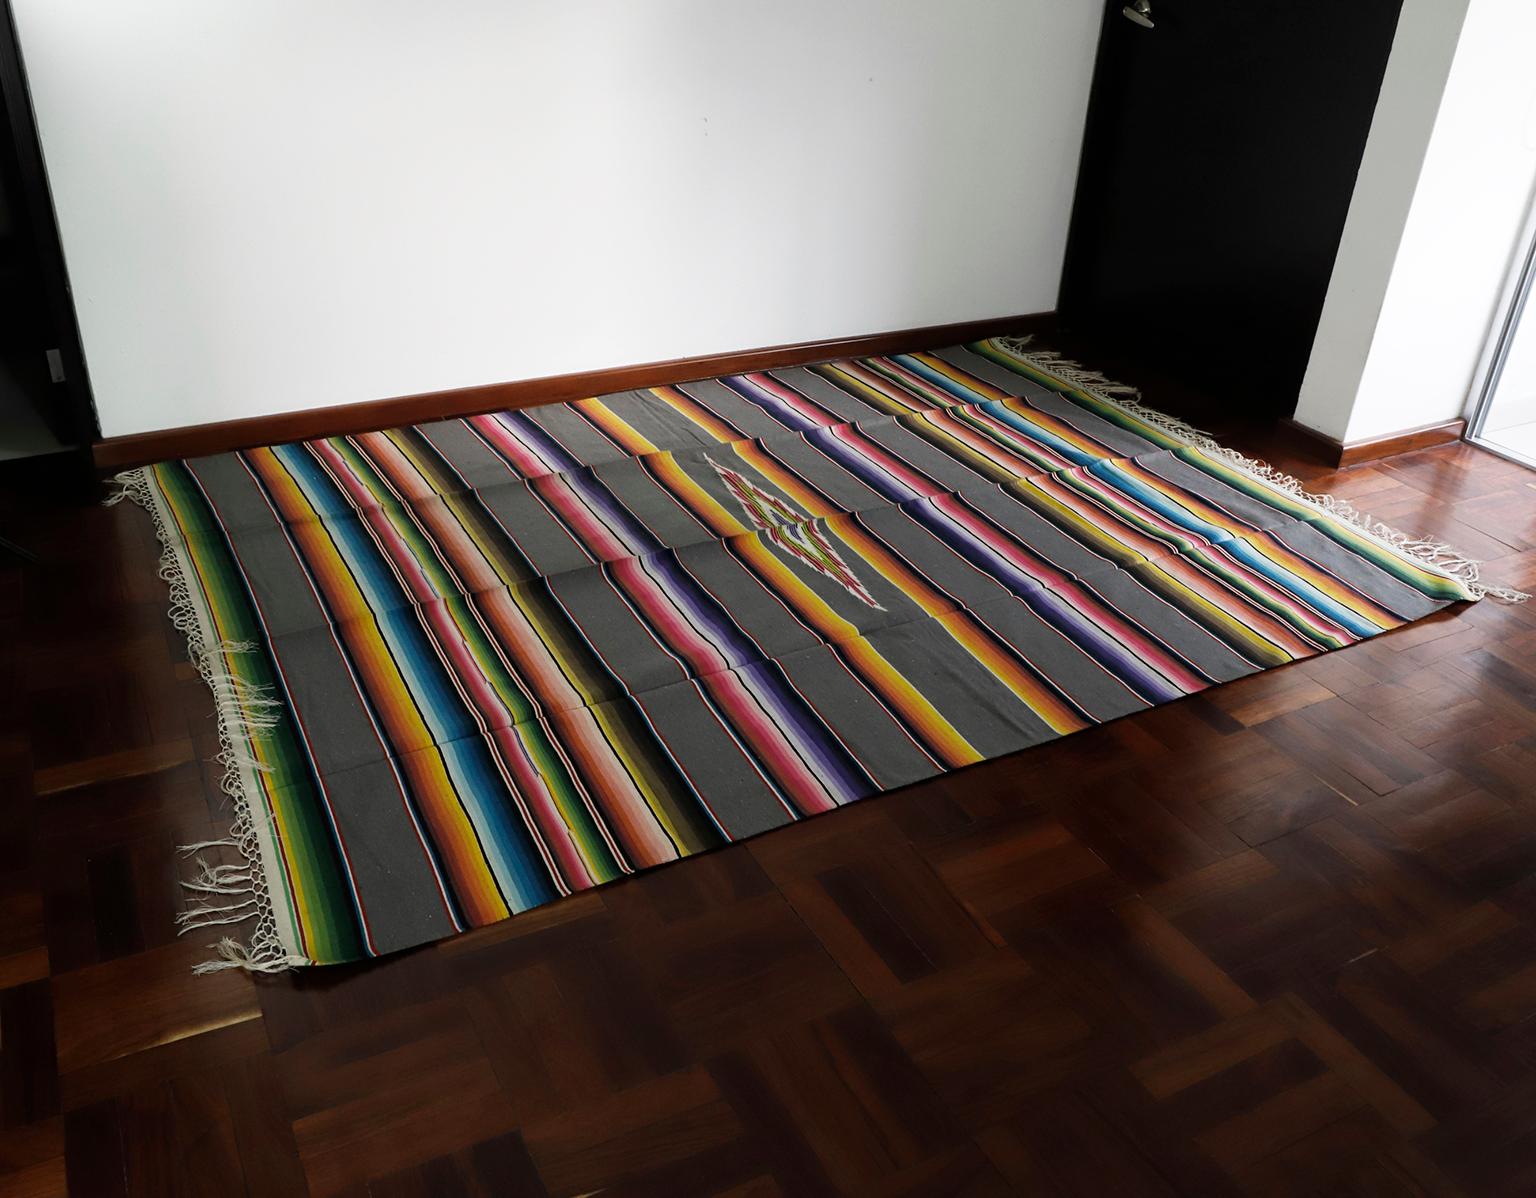 Circa 1940, we offer this finely hand crafted and vibrantly hued striped hand loomed wool serape from Mexico.